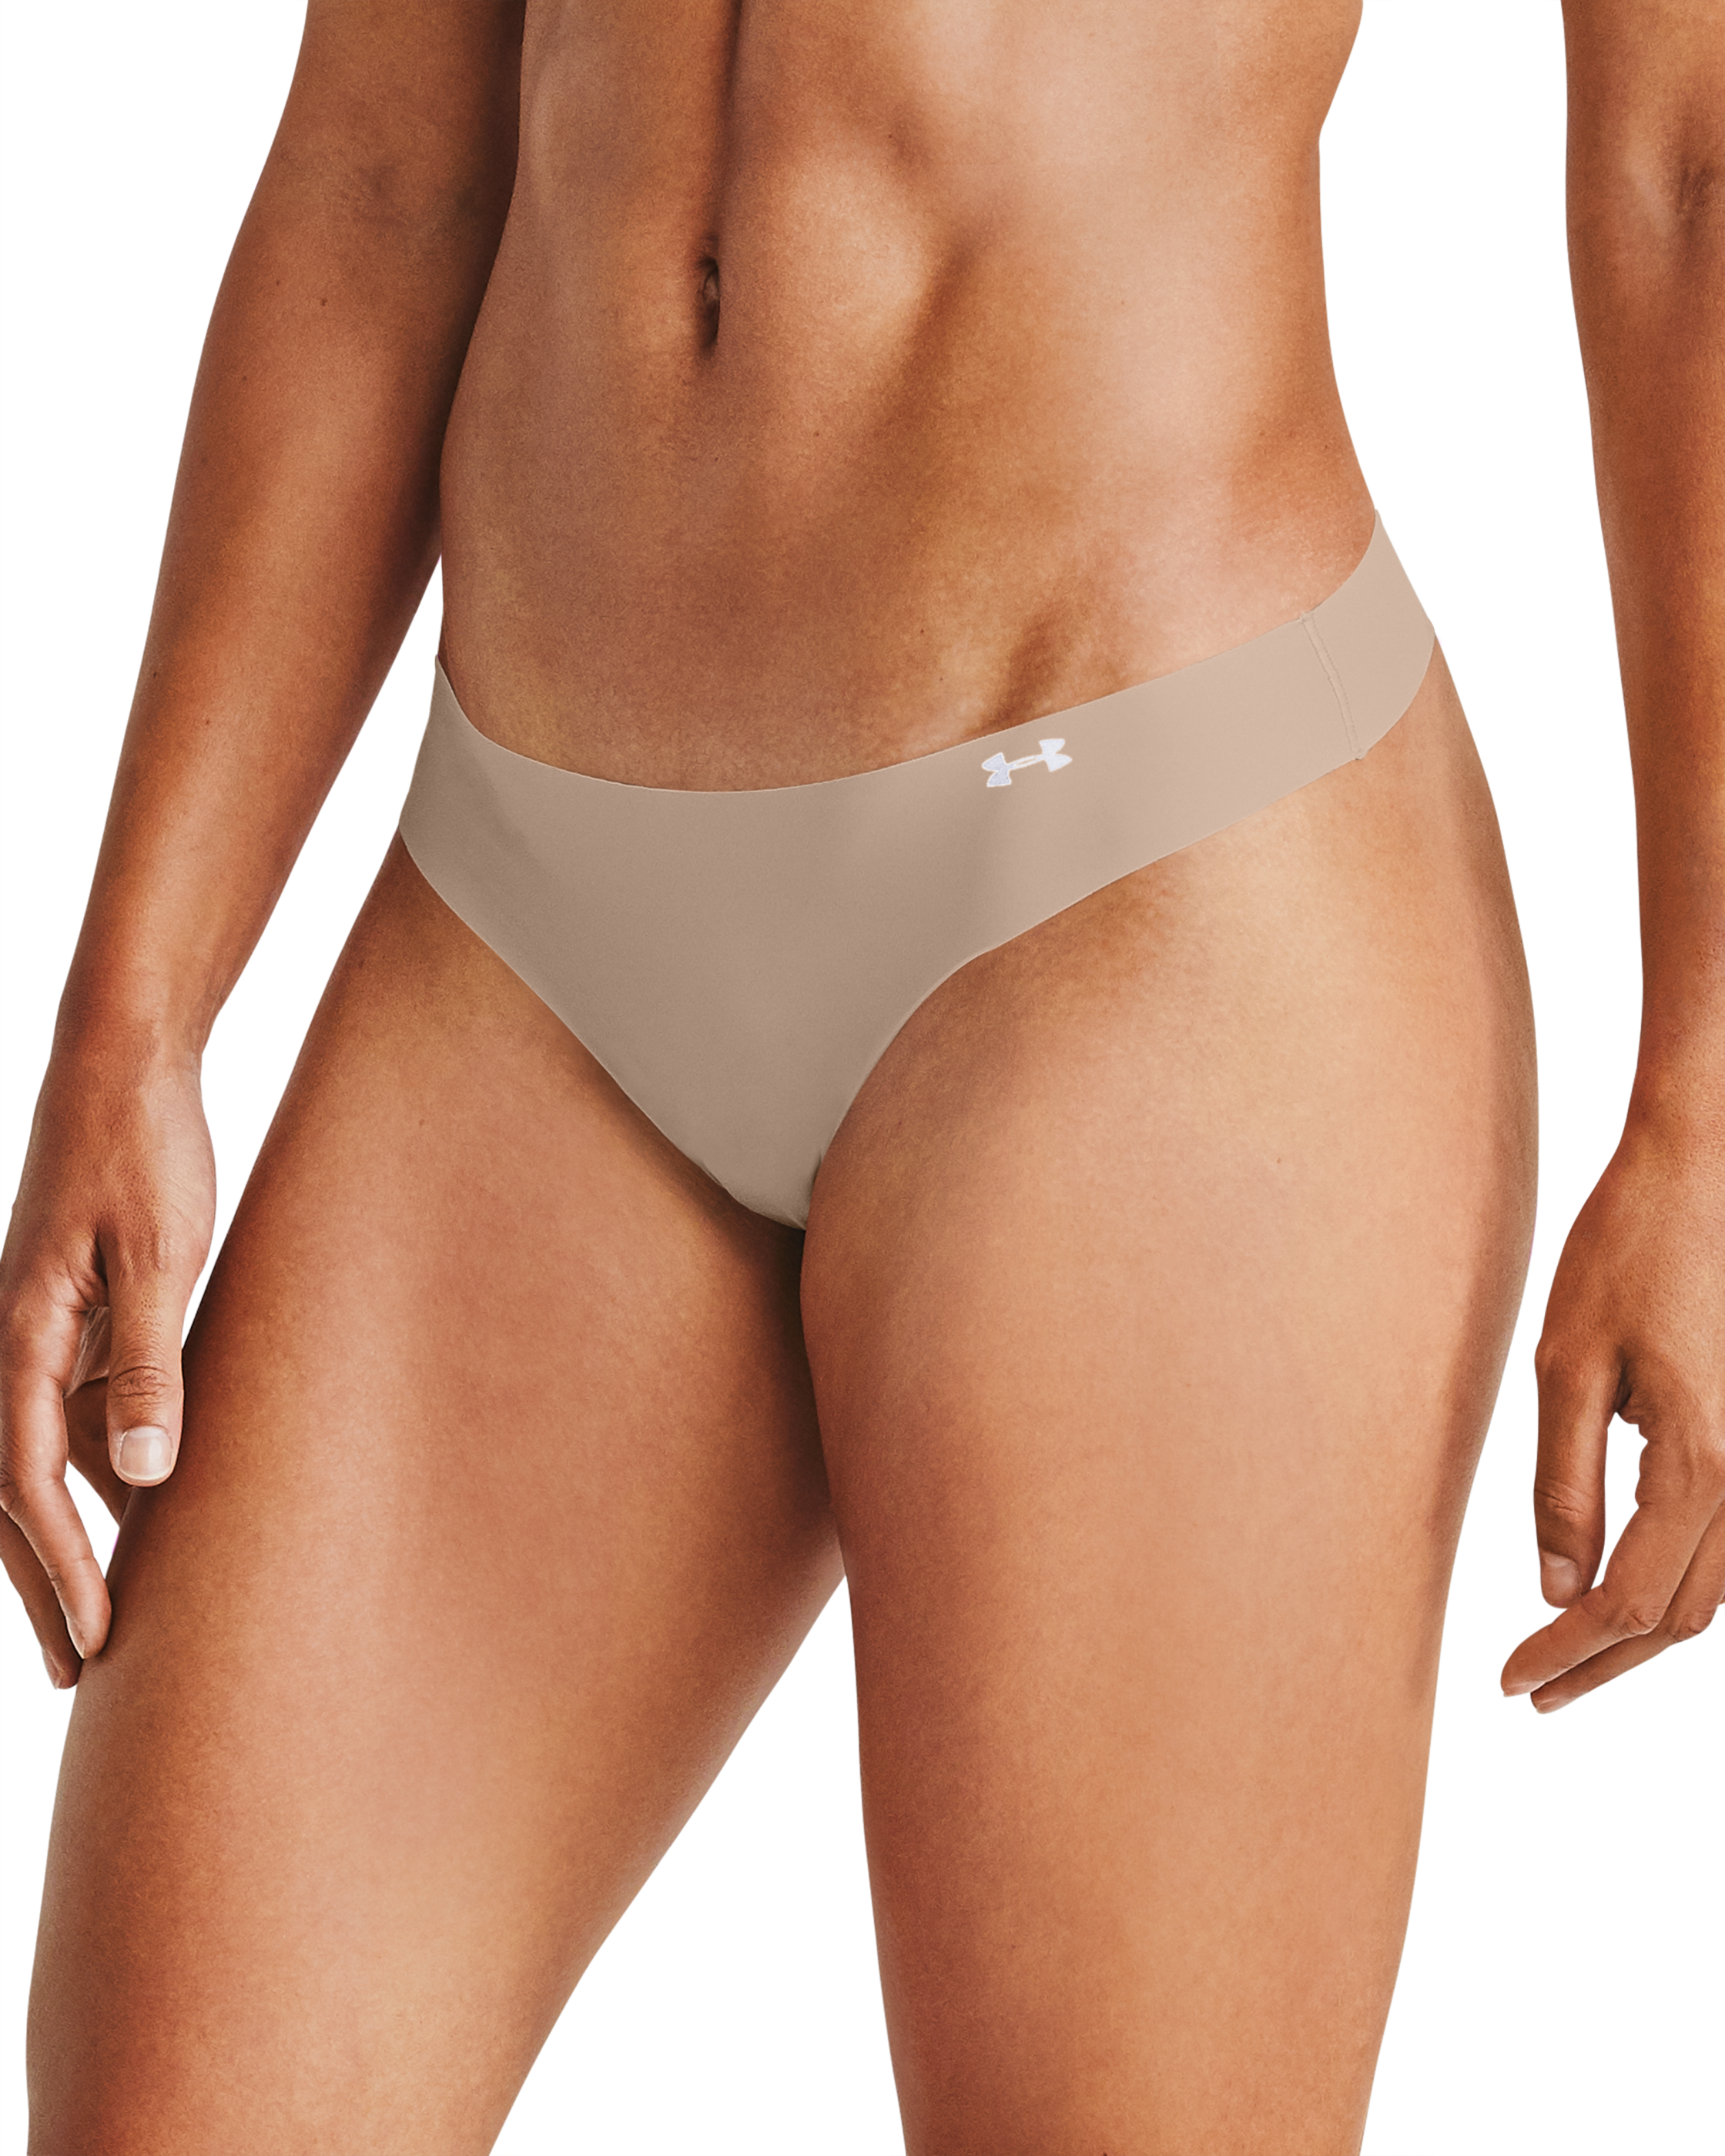 Under Armour Pure Stretch Thong, Pack of 3, Black, XS